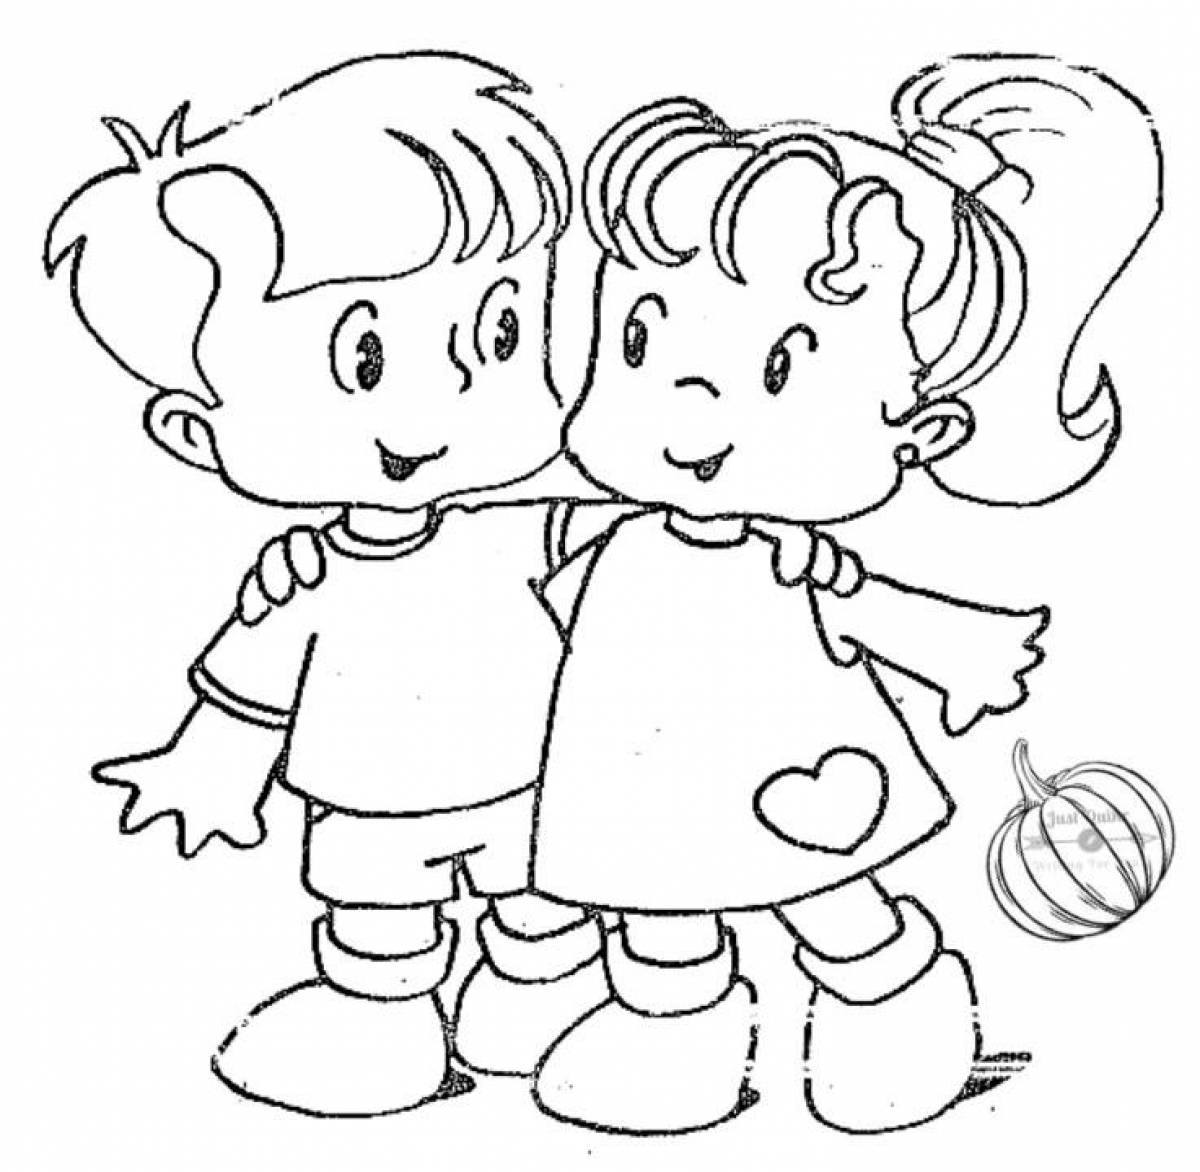 Colorful friends of friendship coloring page